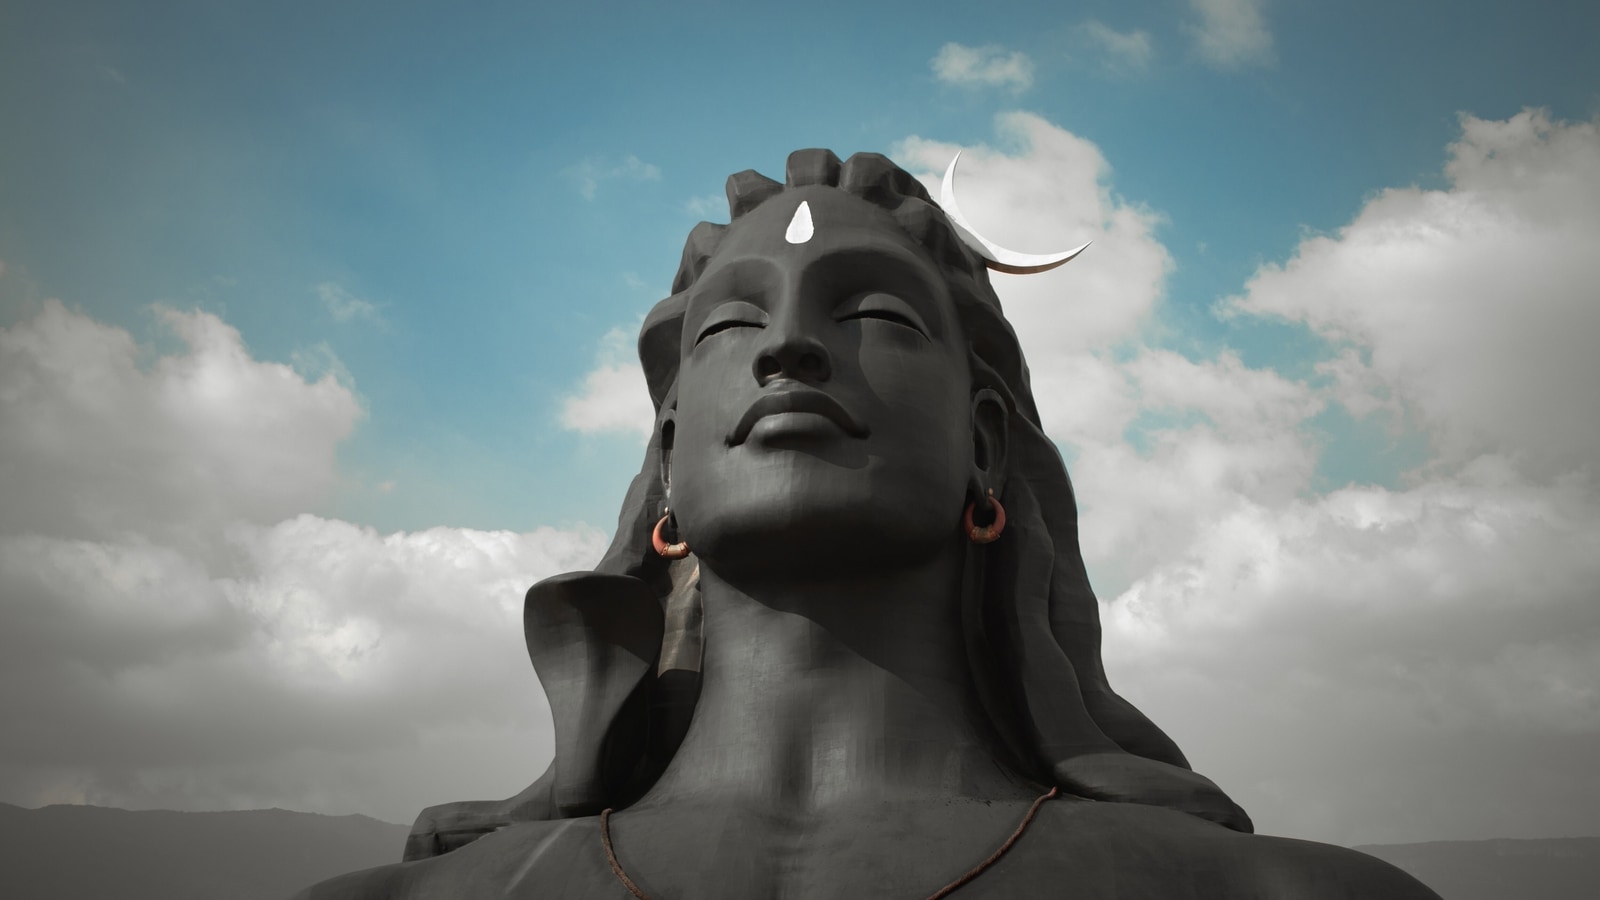 ‘Tallest’ Shiva statue will be unveiled on Saturday in Rajasthan's